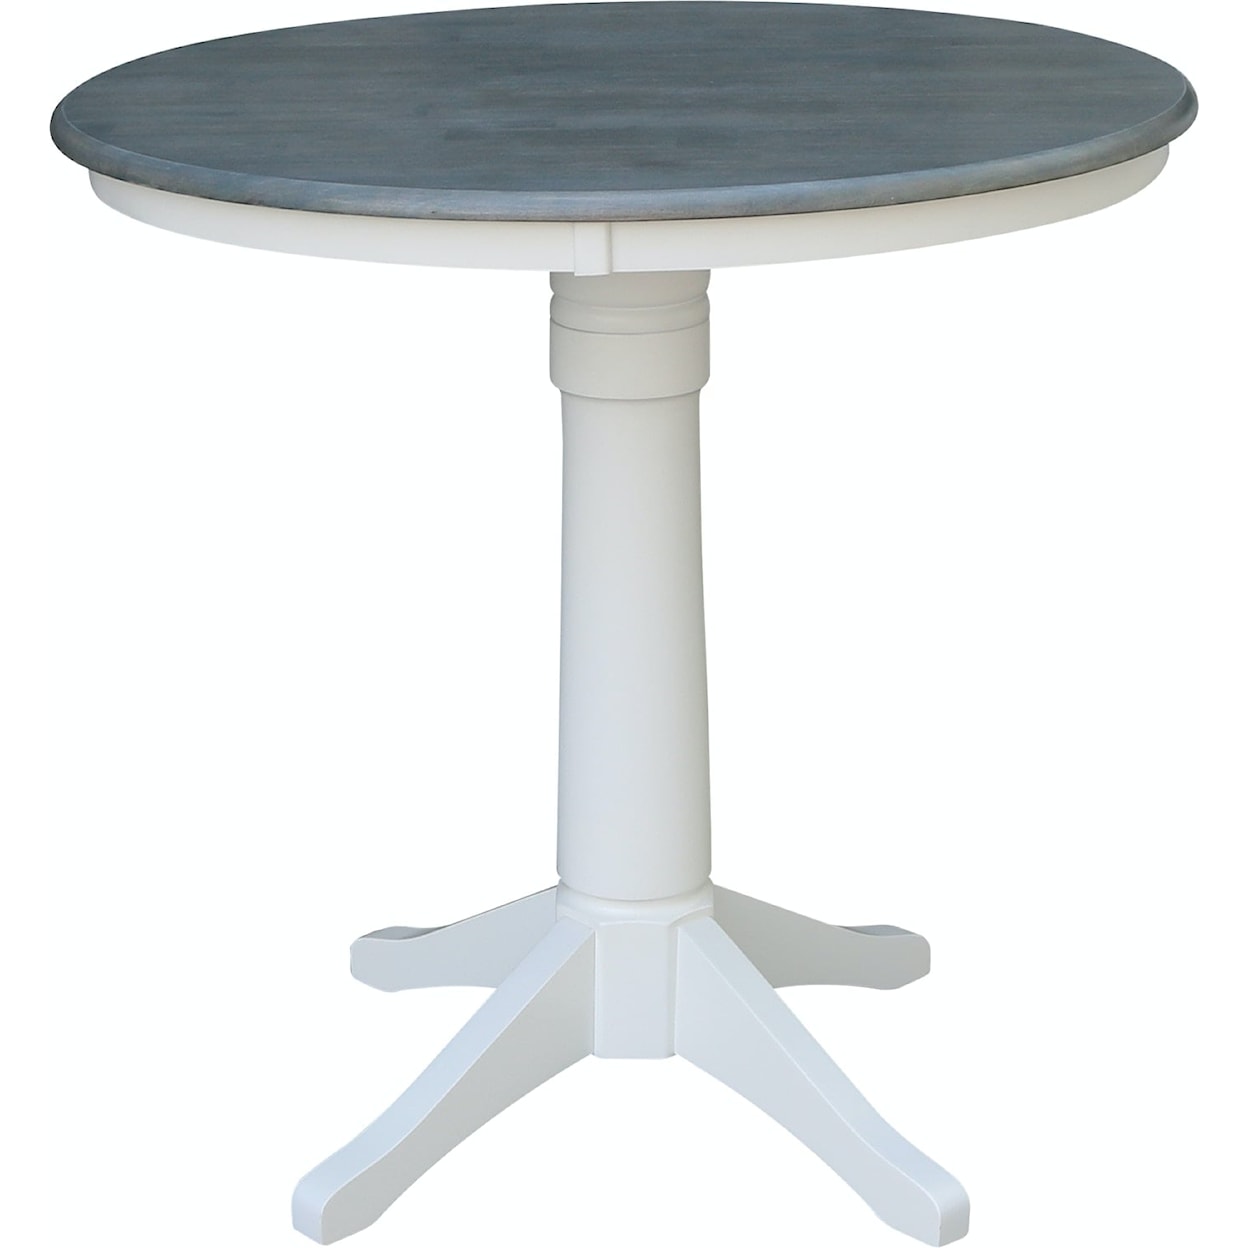 John Thomas Dining Essentials 36'' Pedestal Table in Heather Gray / White